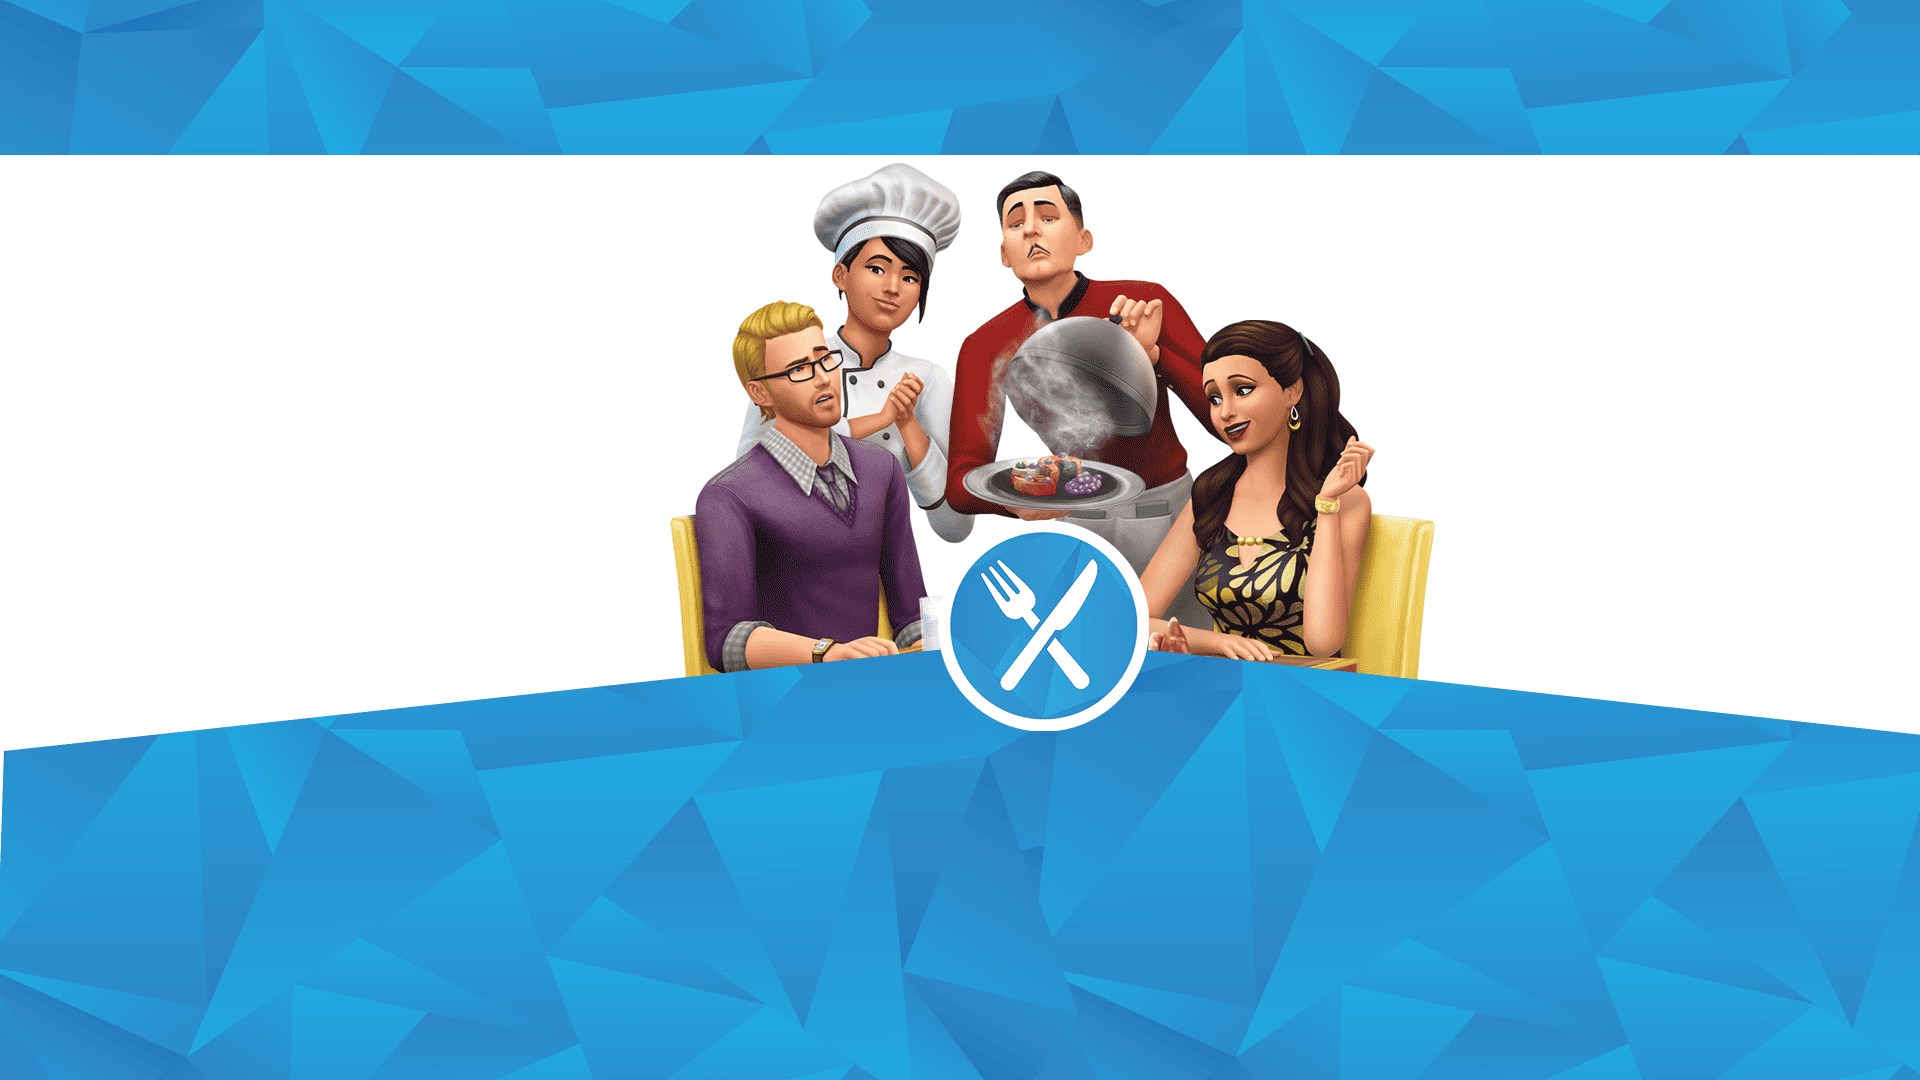 How to Play The Sims 4 for Free on PC, Mac, PlayStation, and Xbox